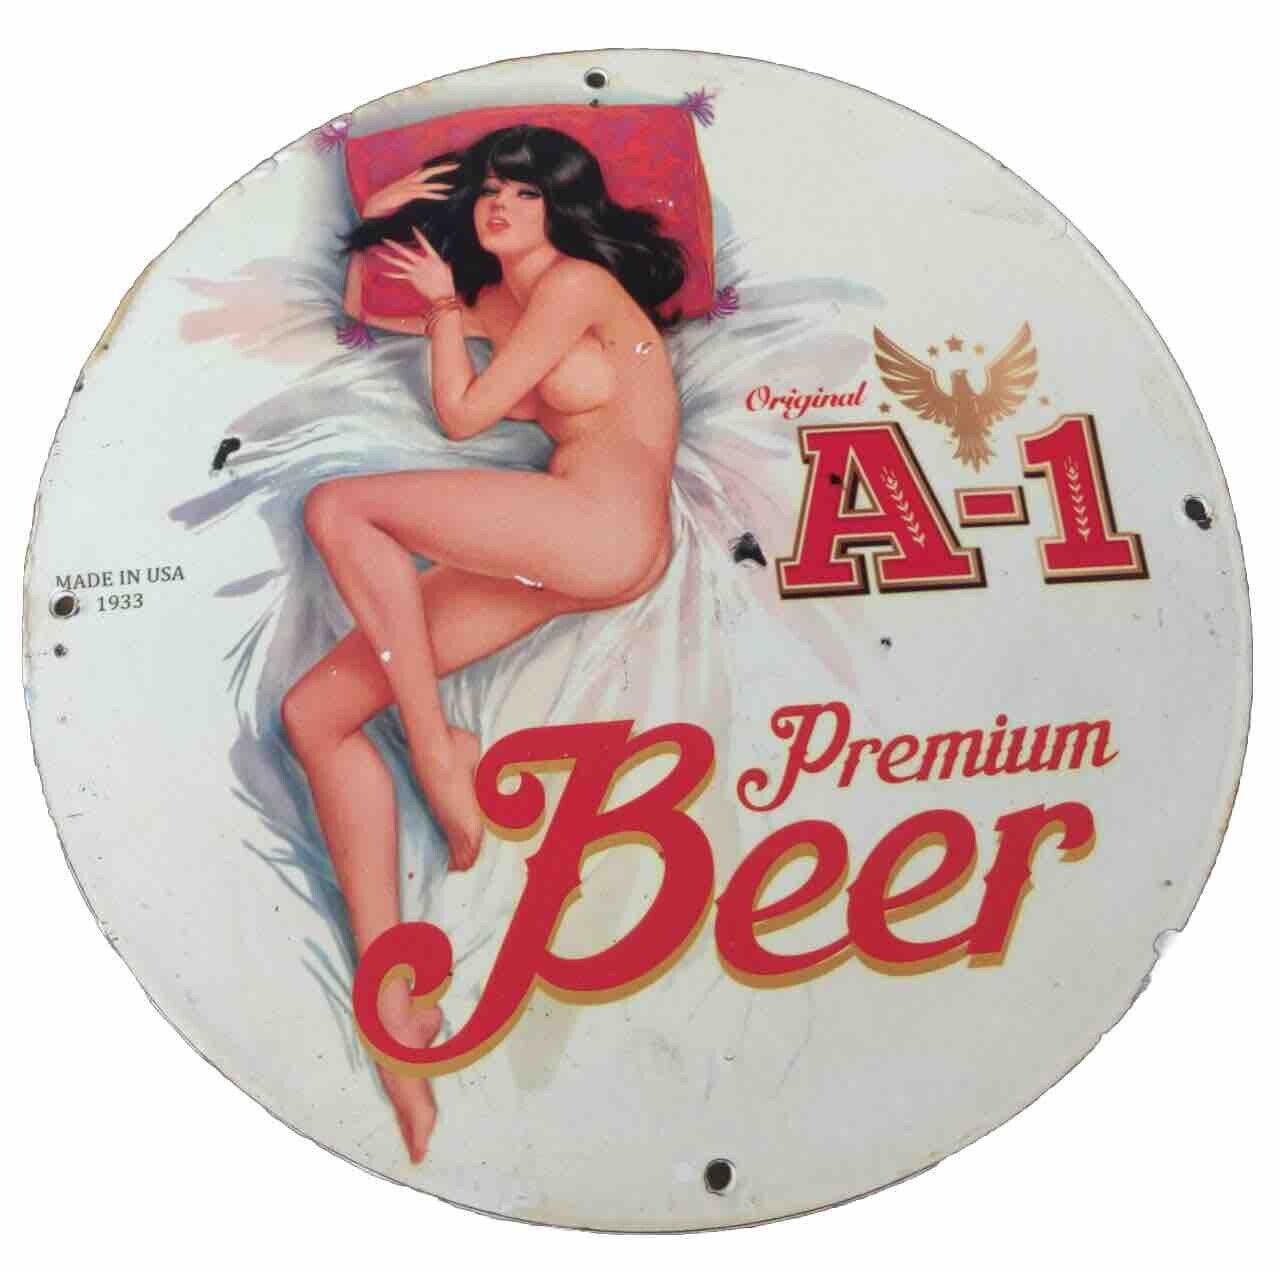 RARE A-1 PREMIUM BEER PINUP STYLE GIRL STYLE PORCELAIN GAS OIL PUMP BREWERY SIGN